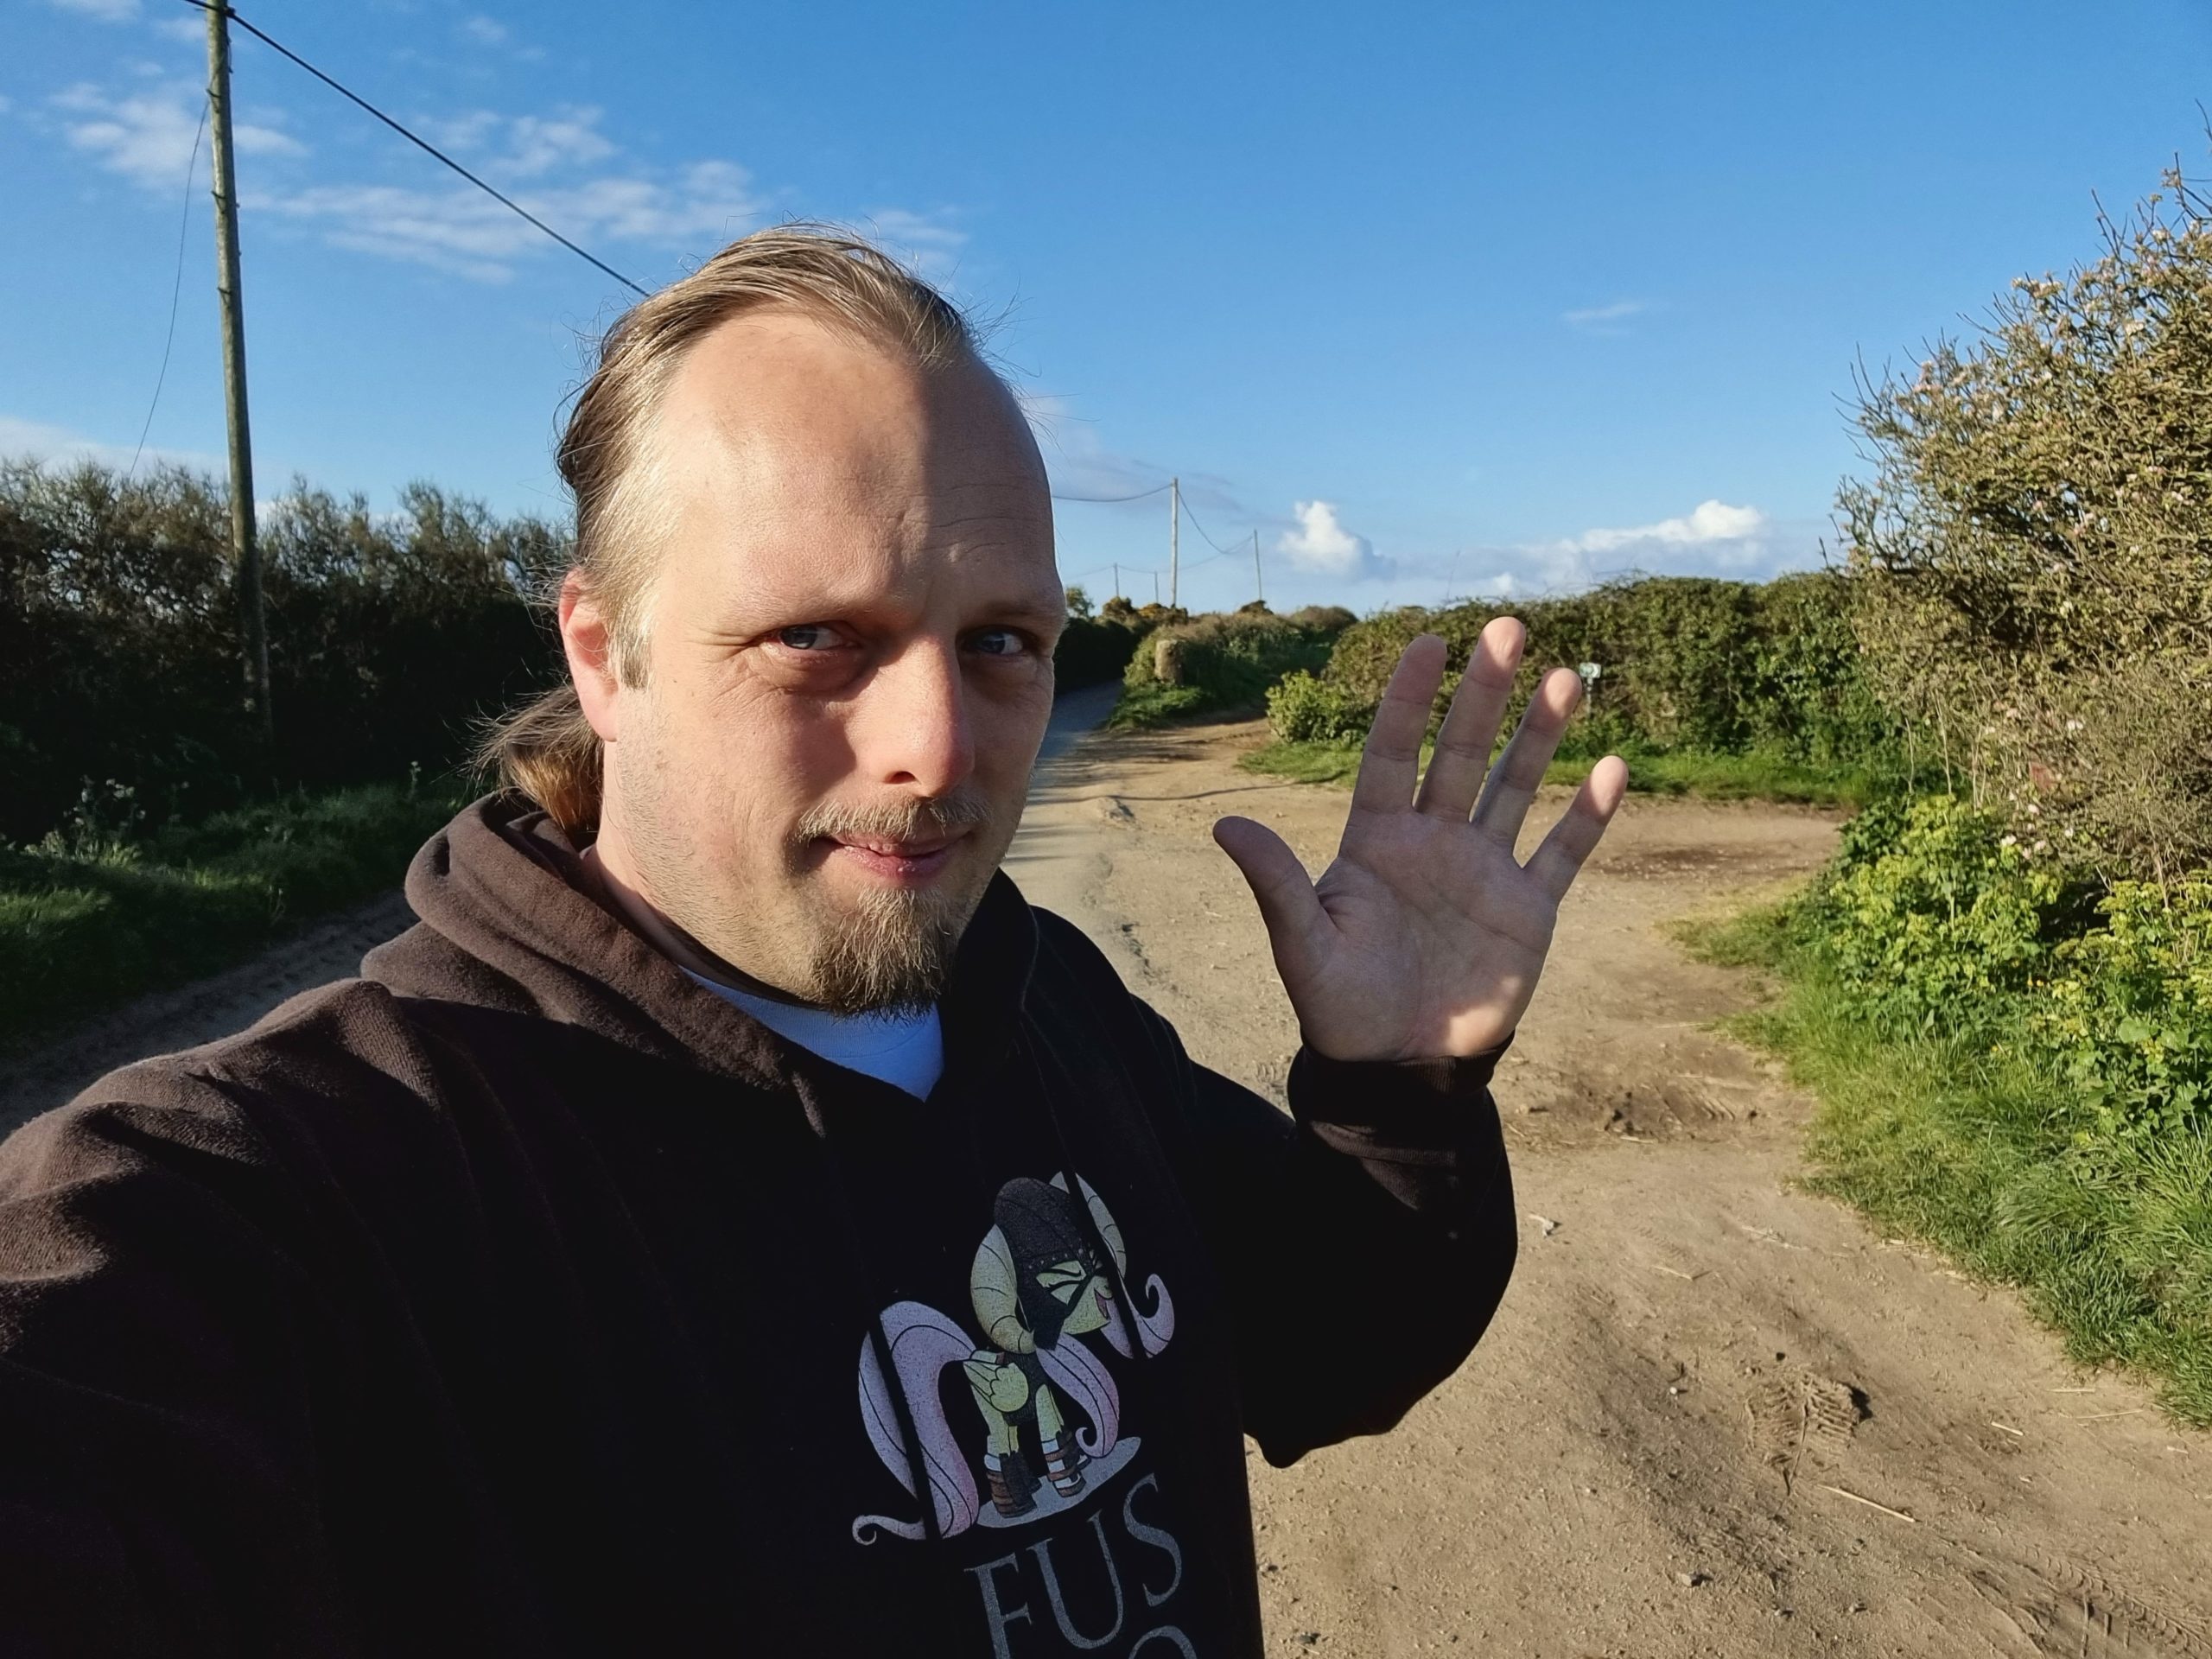 Dan, on a country lane in Cornwall, in front of a bright blue sky, waves to the camera.